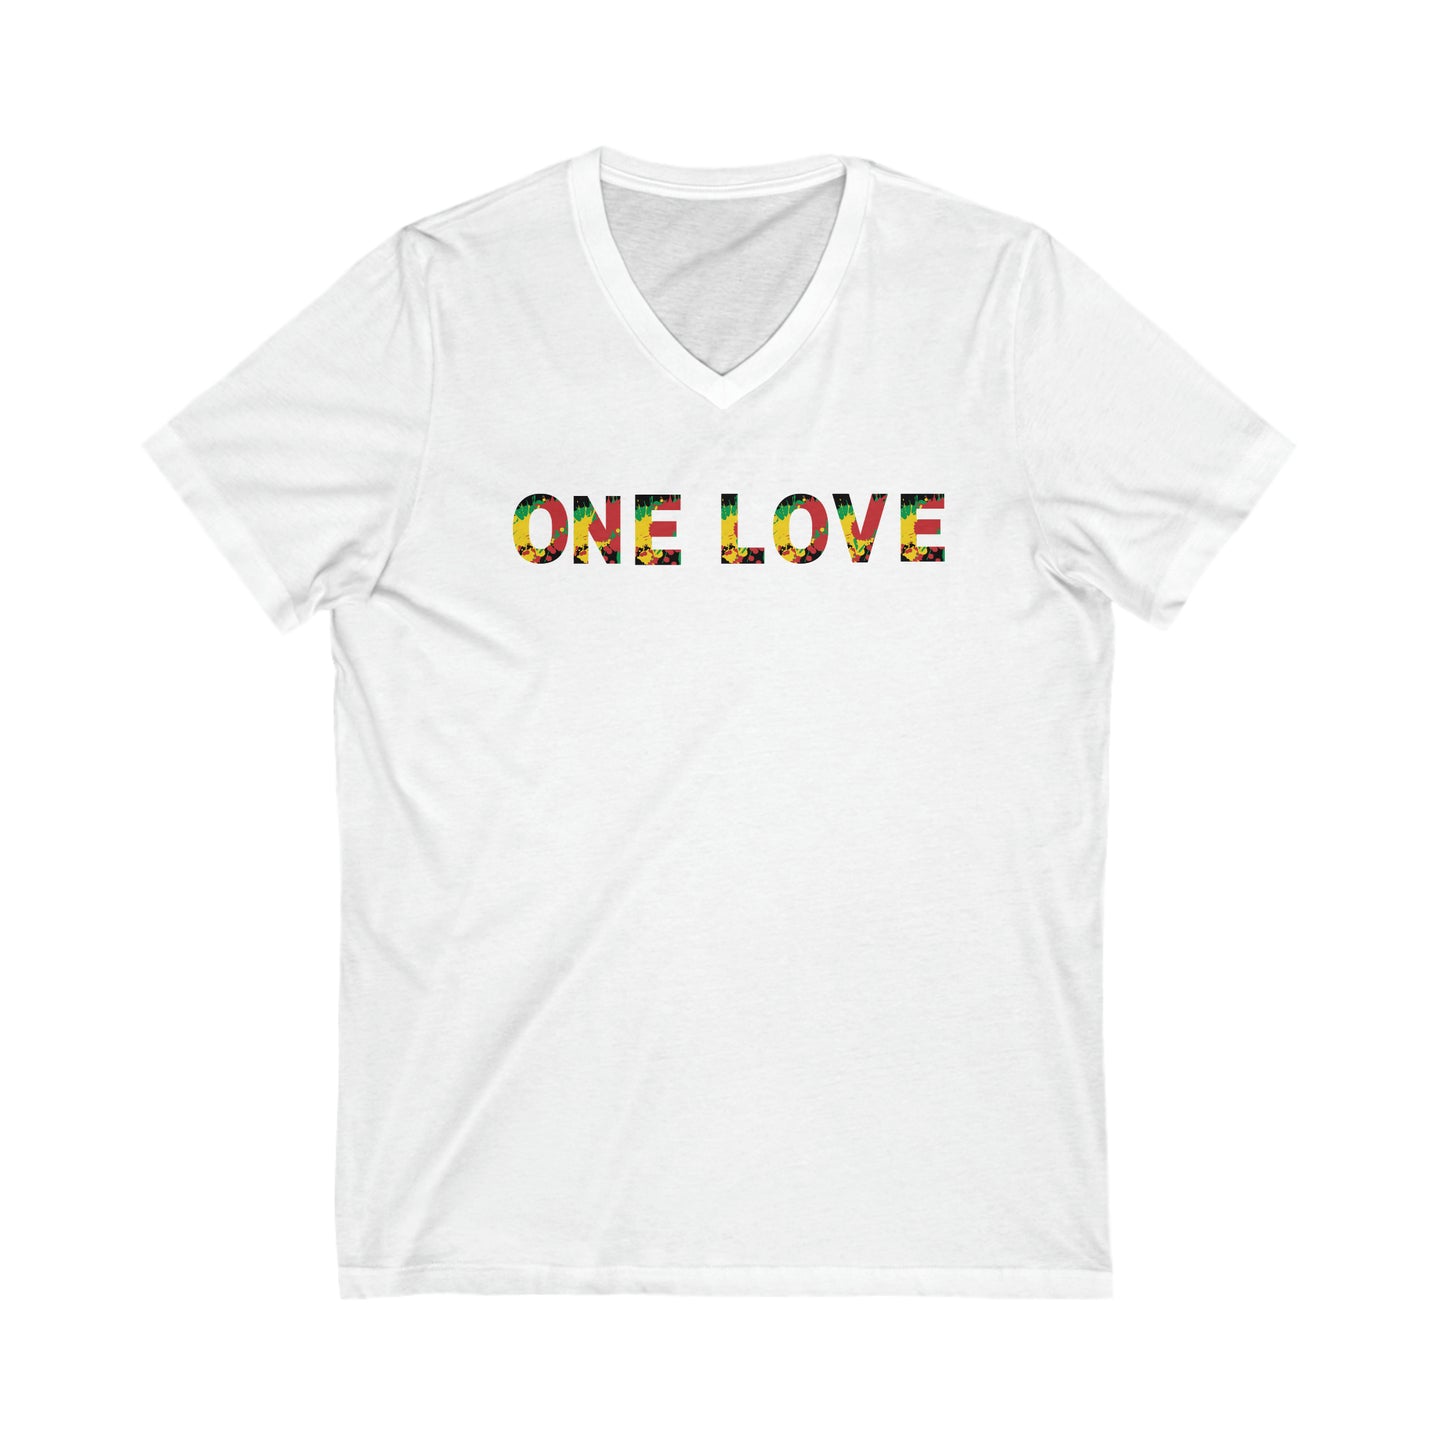 ONE LOVE ROOTS COLOR STATEMENT V NECK TEE SHIRT GIFT